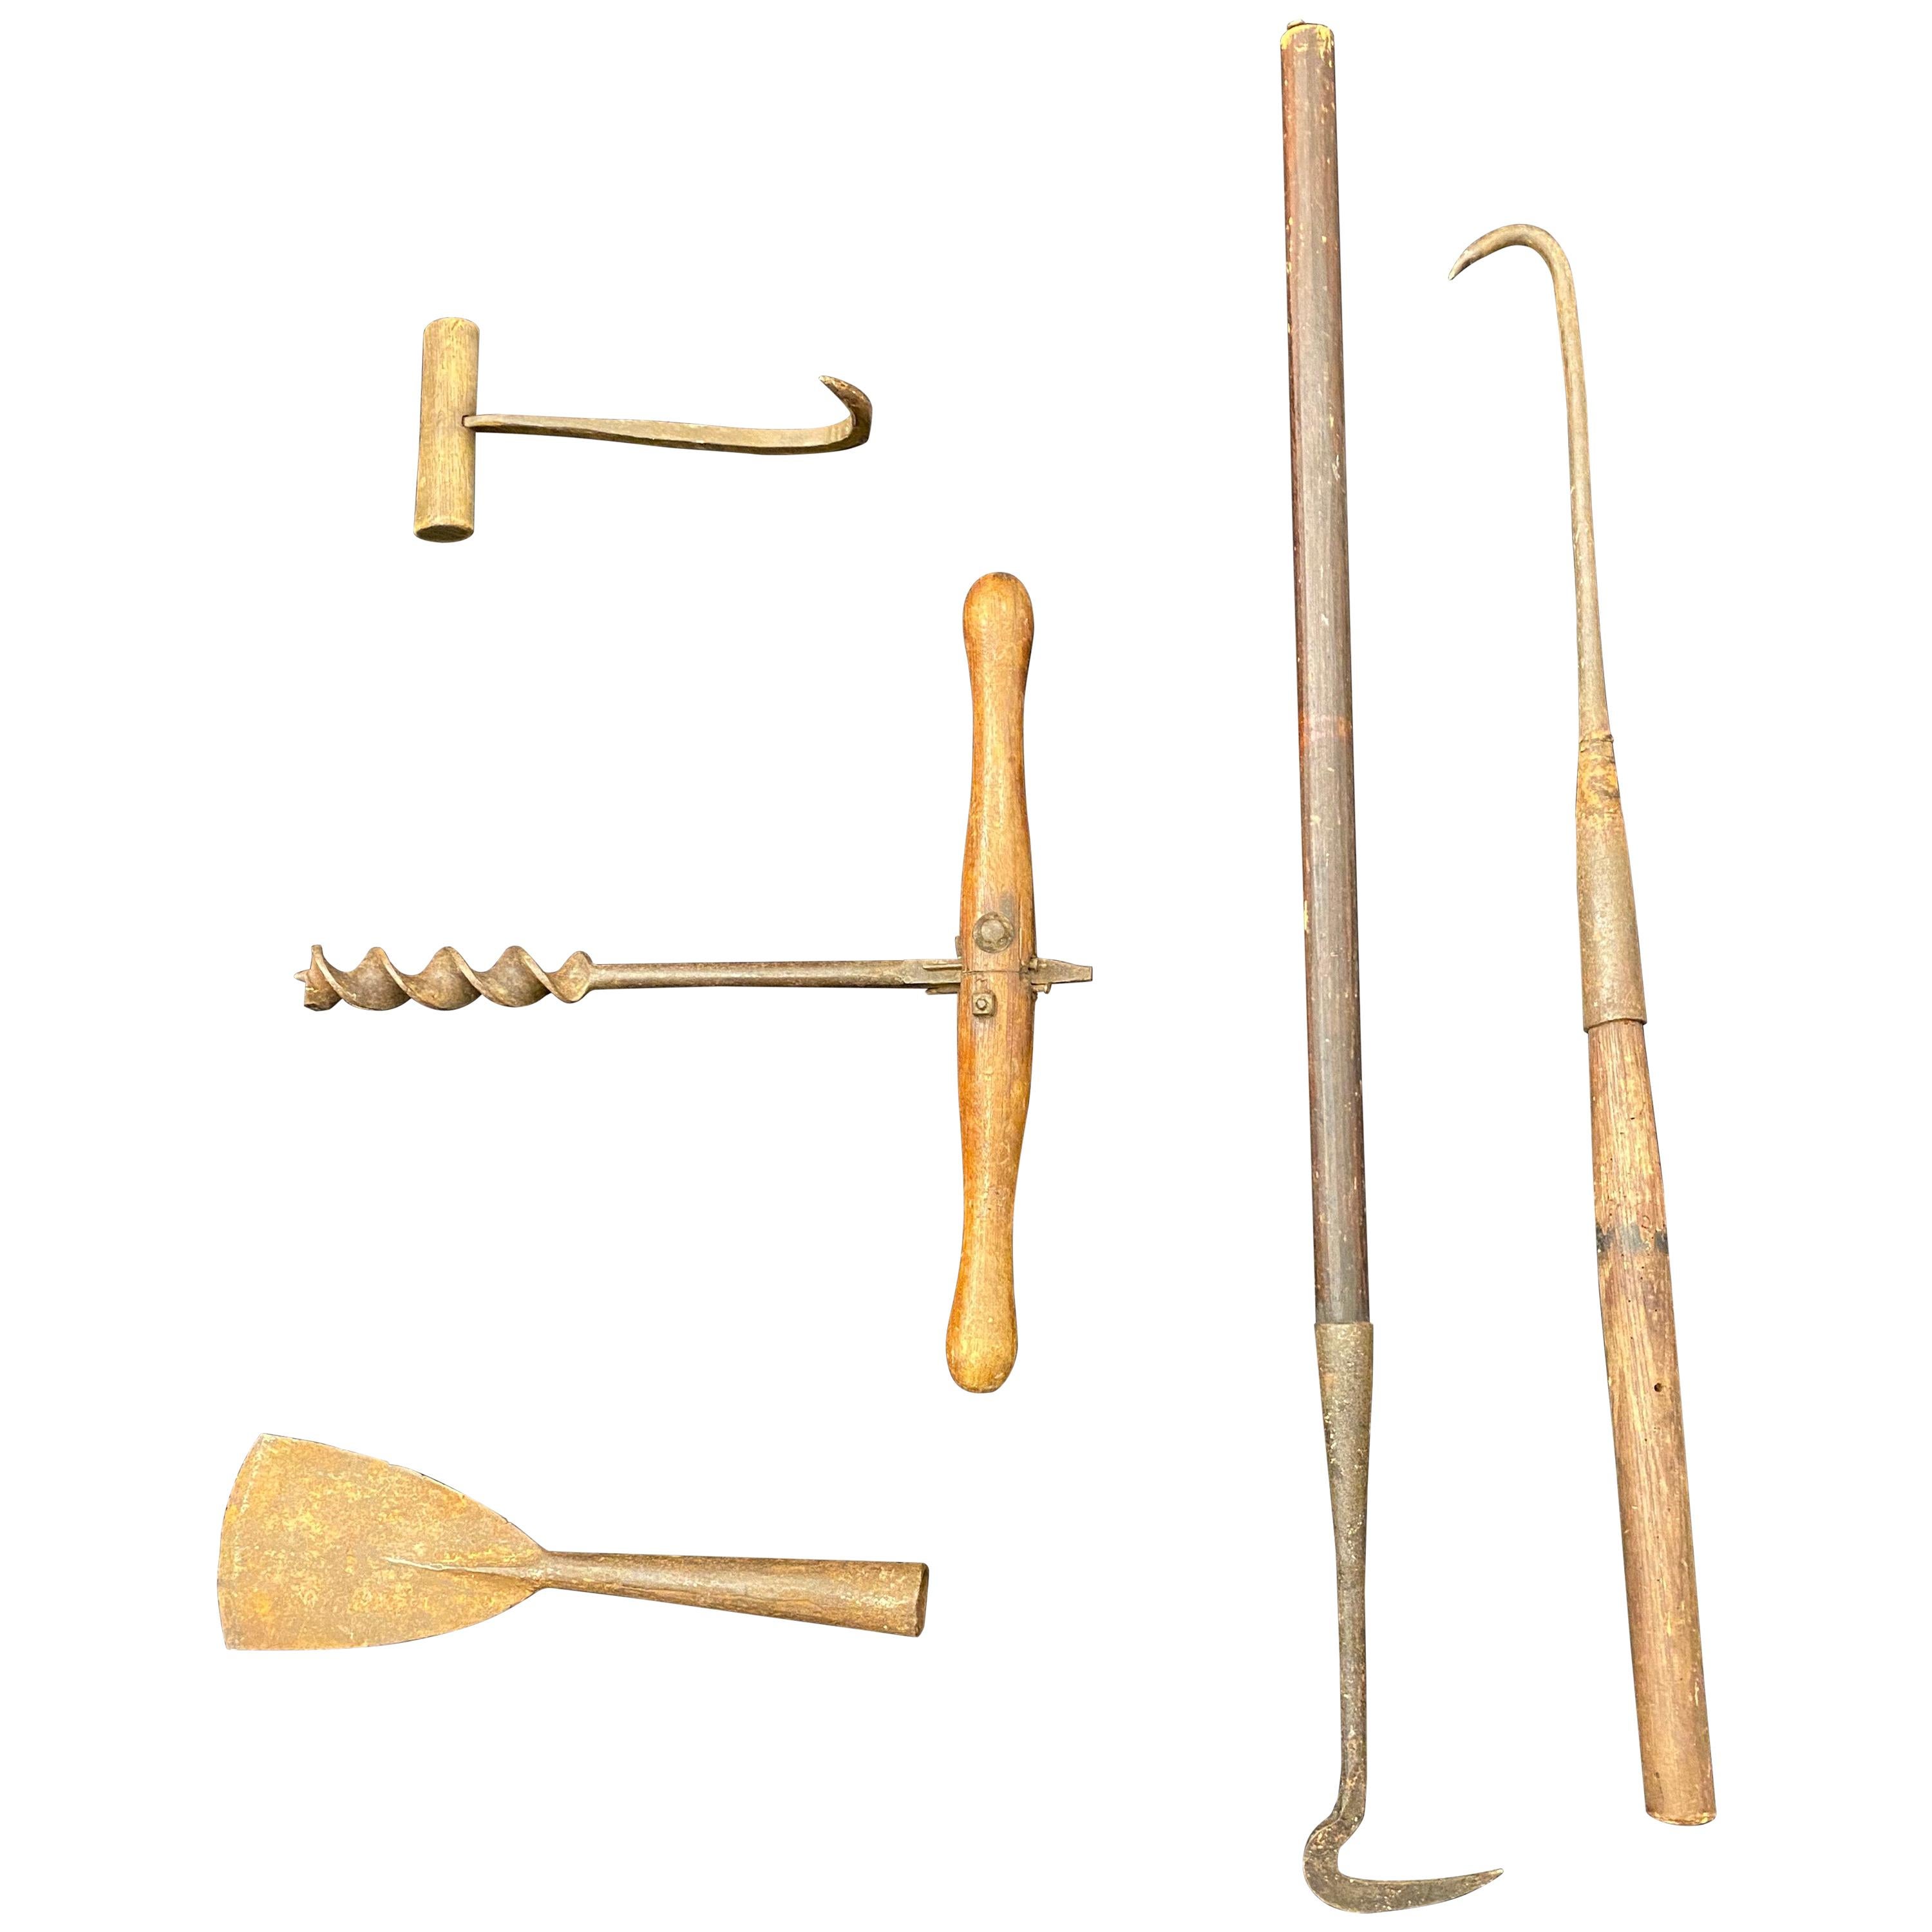 Tools from a 19th Century Waling Vessel